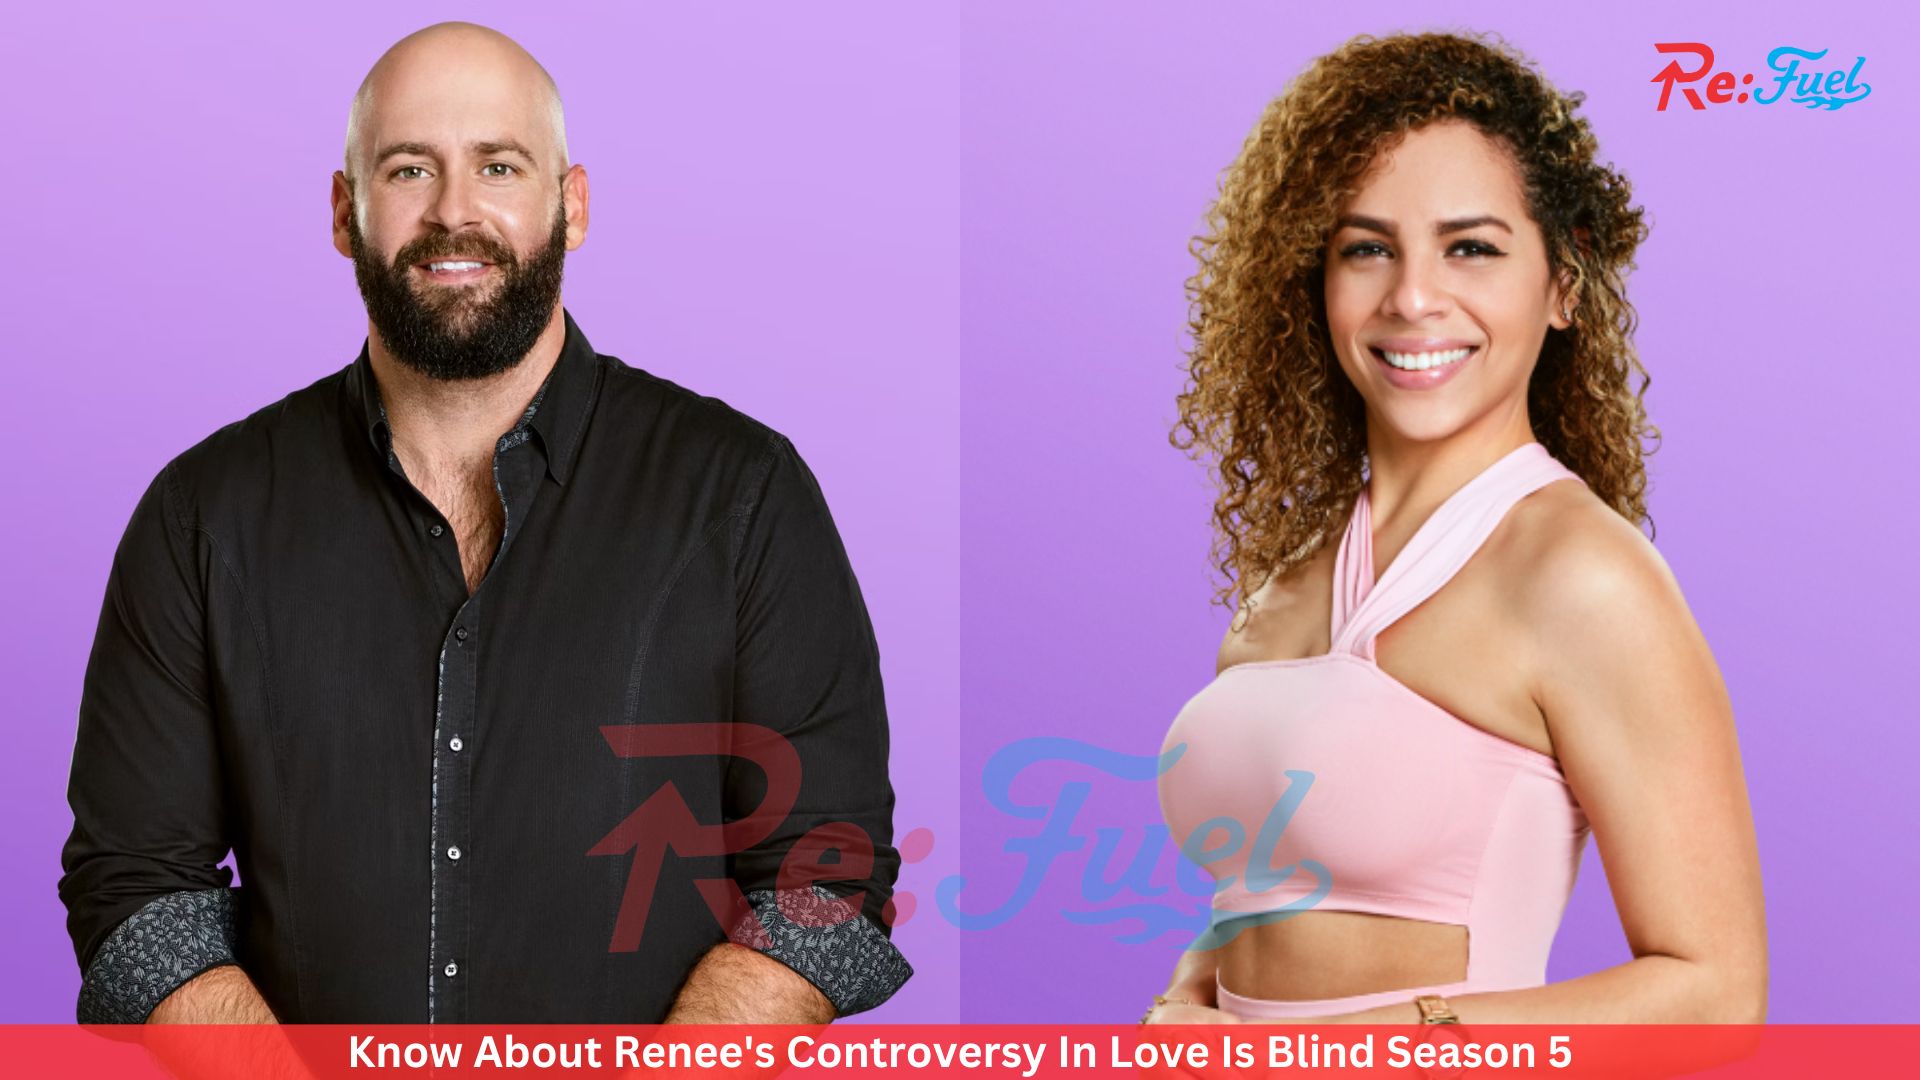 Know About Renee's Controversy In Love Is Blind Season 5